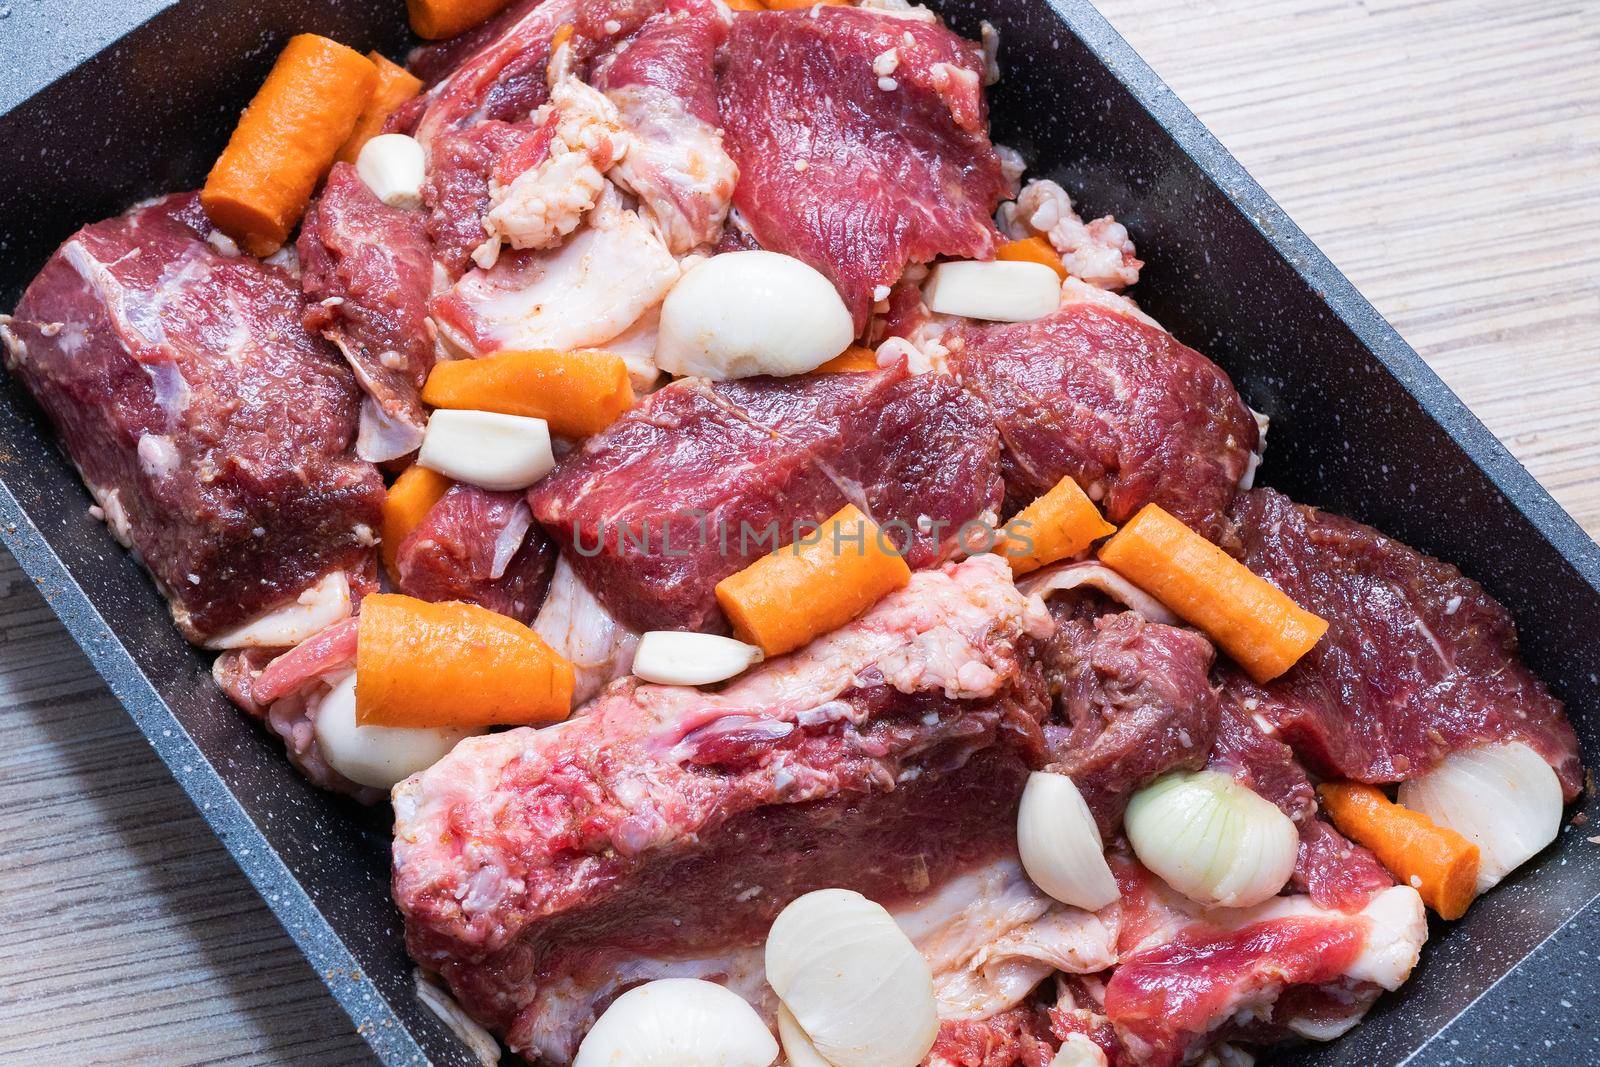 lamb meat on a baking sheet marinated with spices, vegetable oil, carrots and onions ready for baking in the oven or roasting